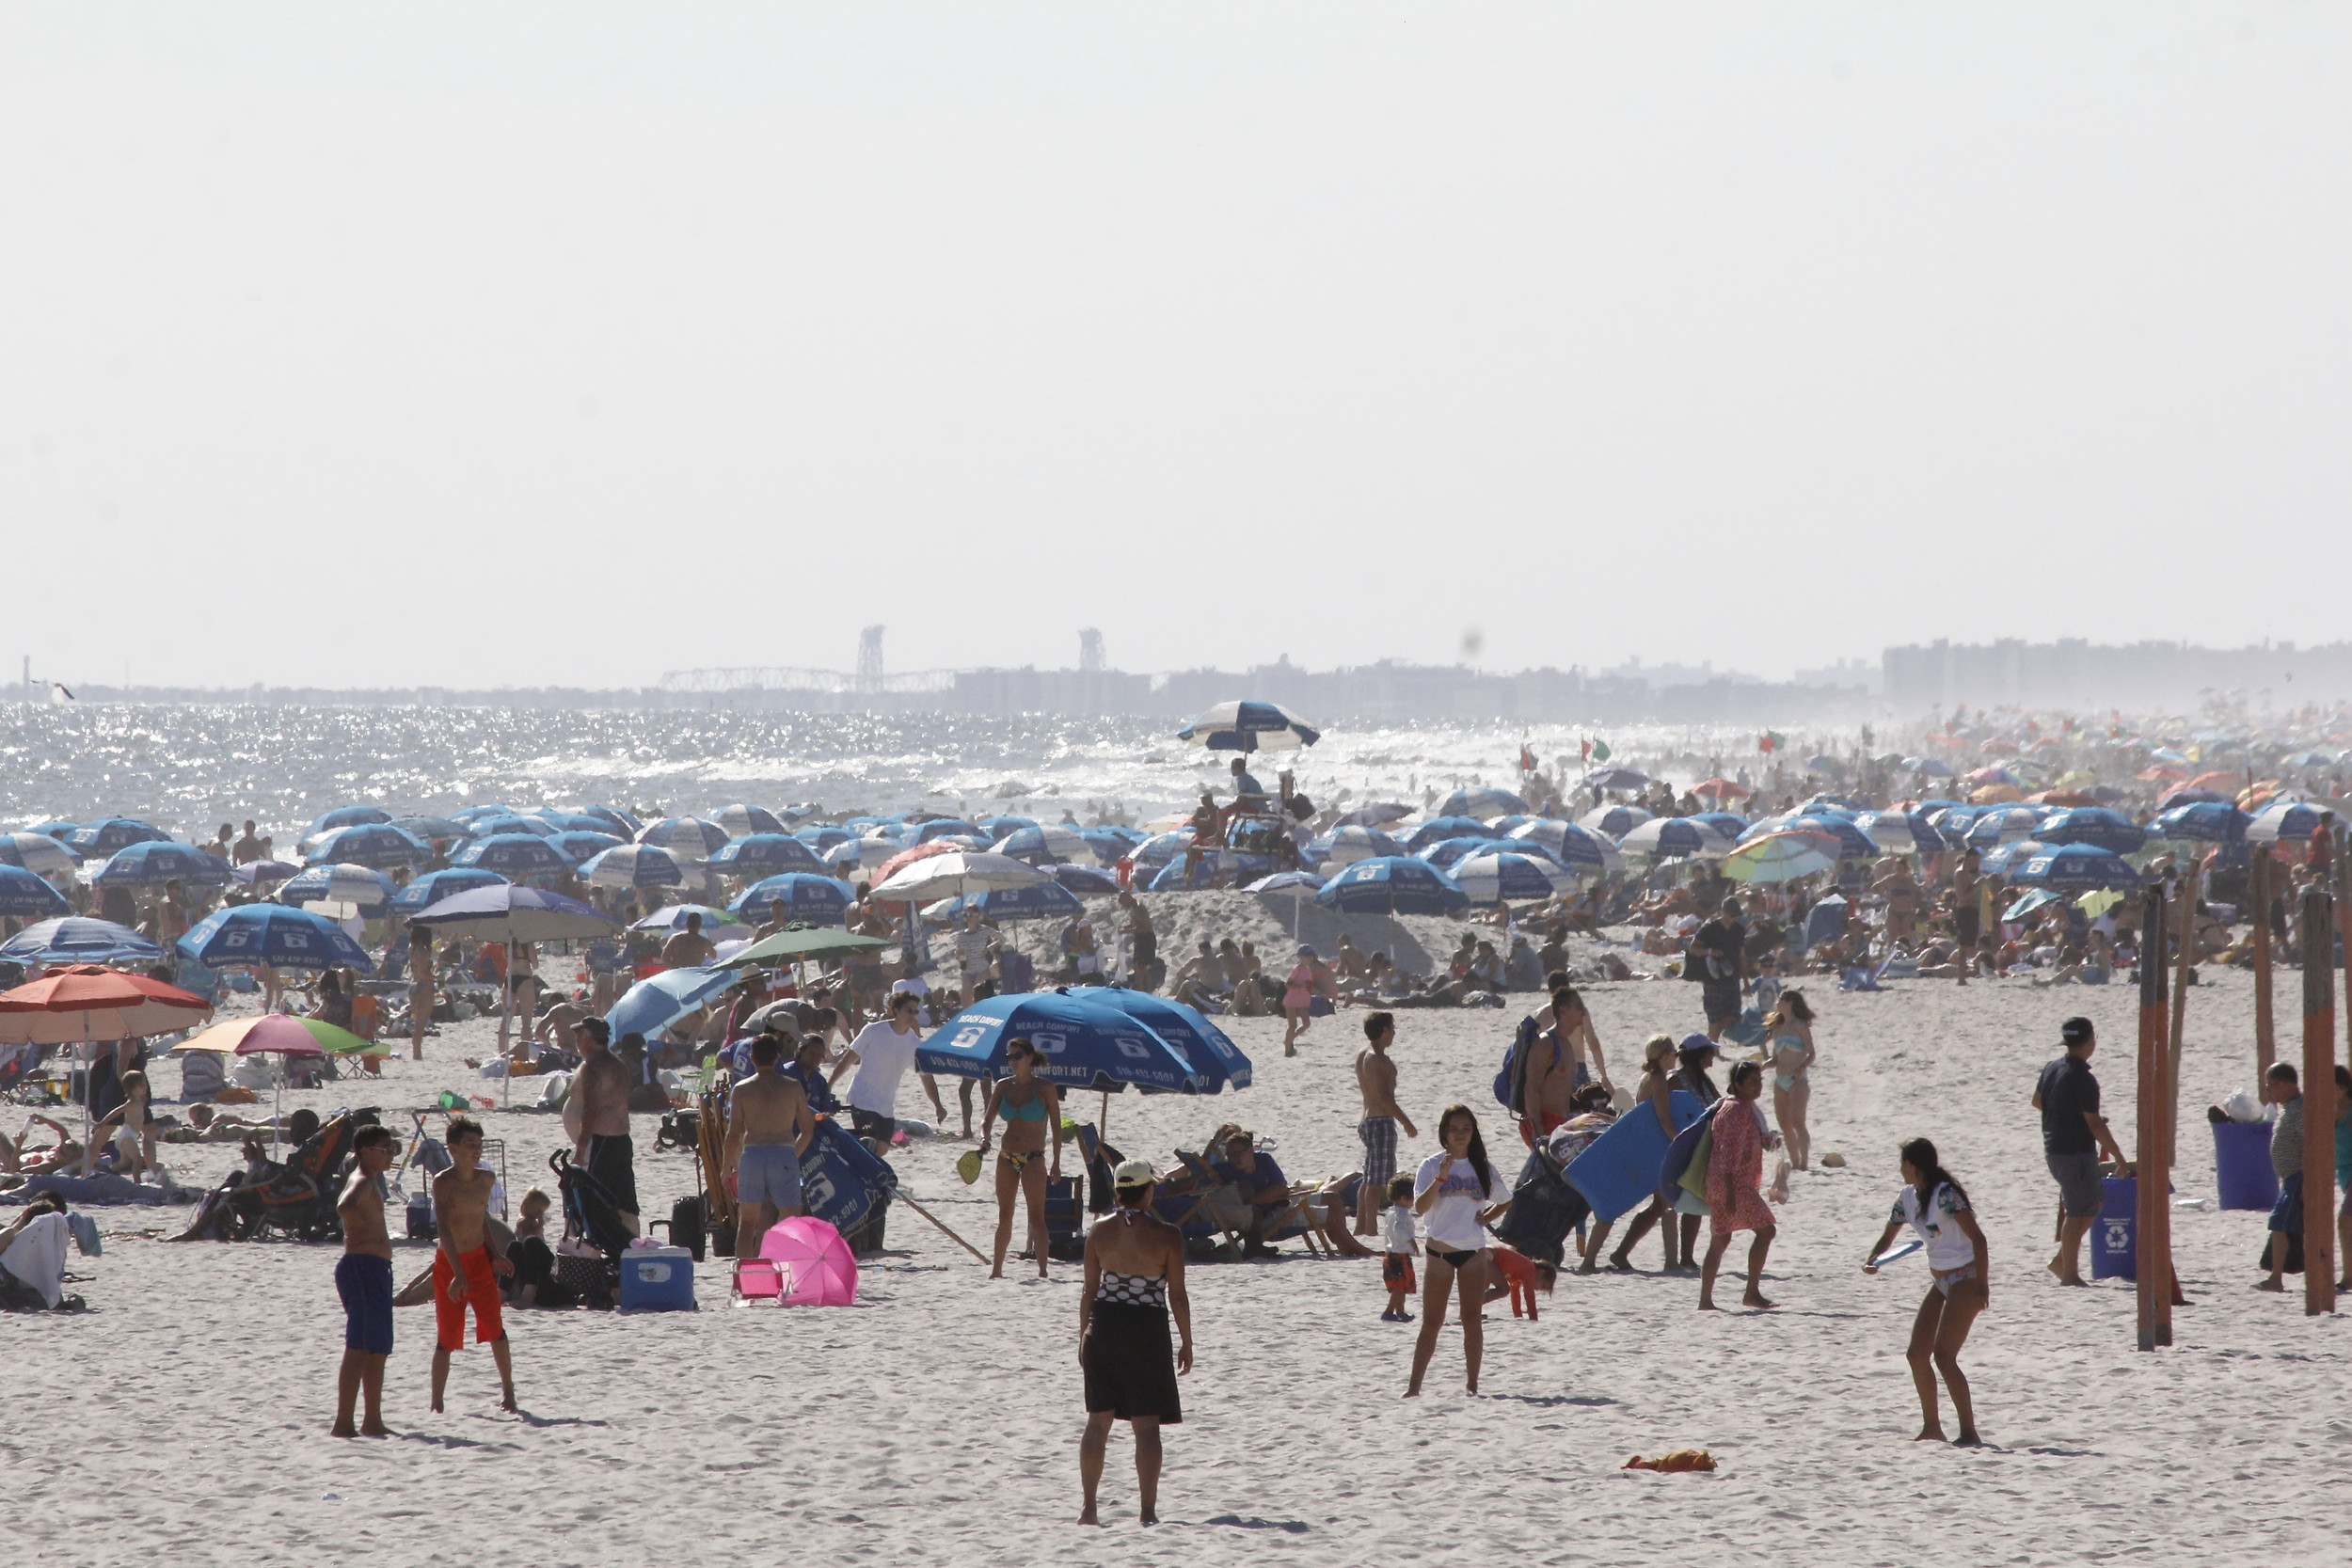 USA Today highlighted the city’s 3.5-mile shore in its description of why Long Beach is among the nation’s top 10 beaches to “start summer off right.”